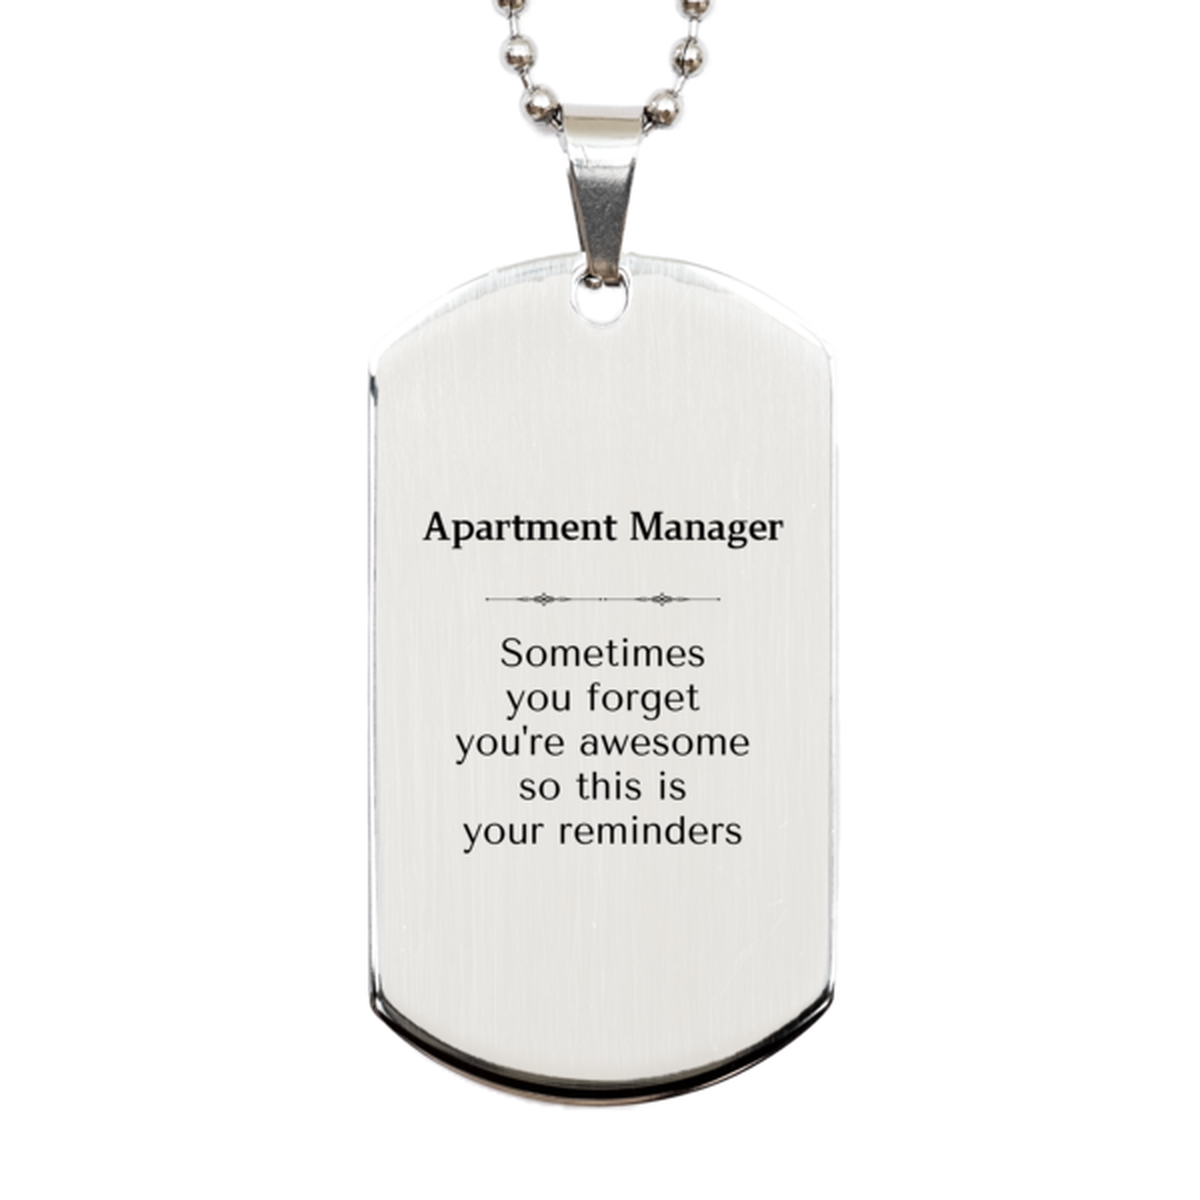 Sentimental Apartment Manager Silver Dog Tag, Apartment Manager Sometimes you forget you're awesome so this is your reminders, Graduation Christmas Birthday Gifts for Apartment Manager, Men, Women, Coworkers